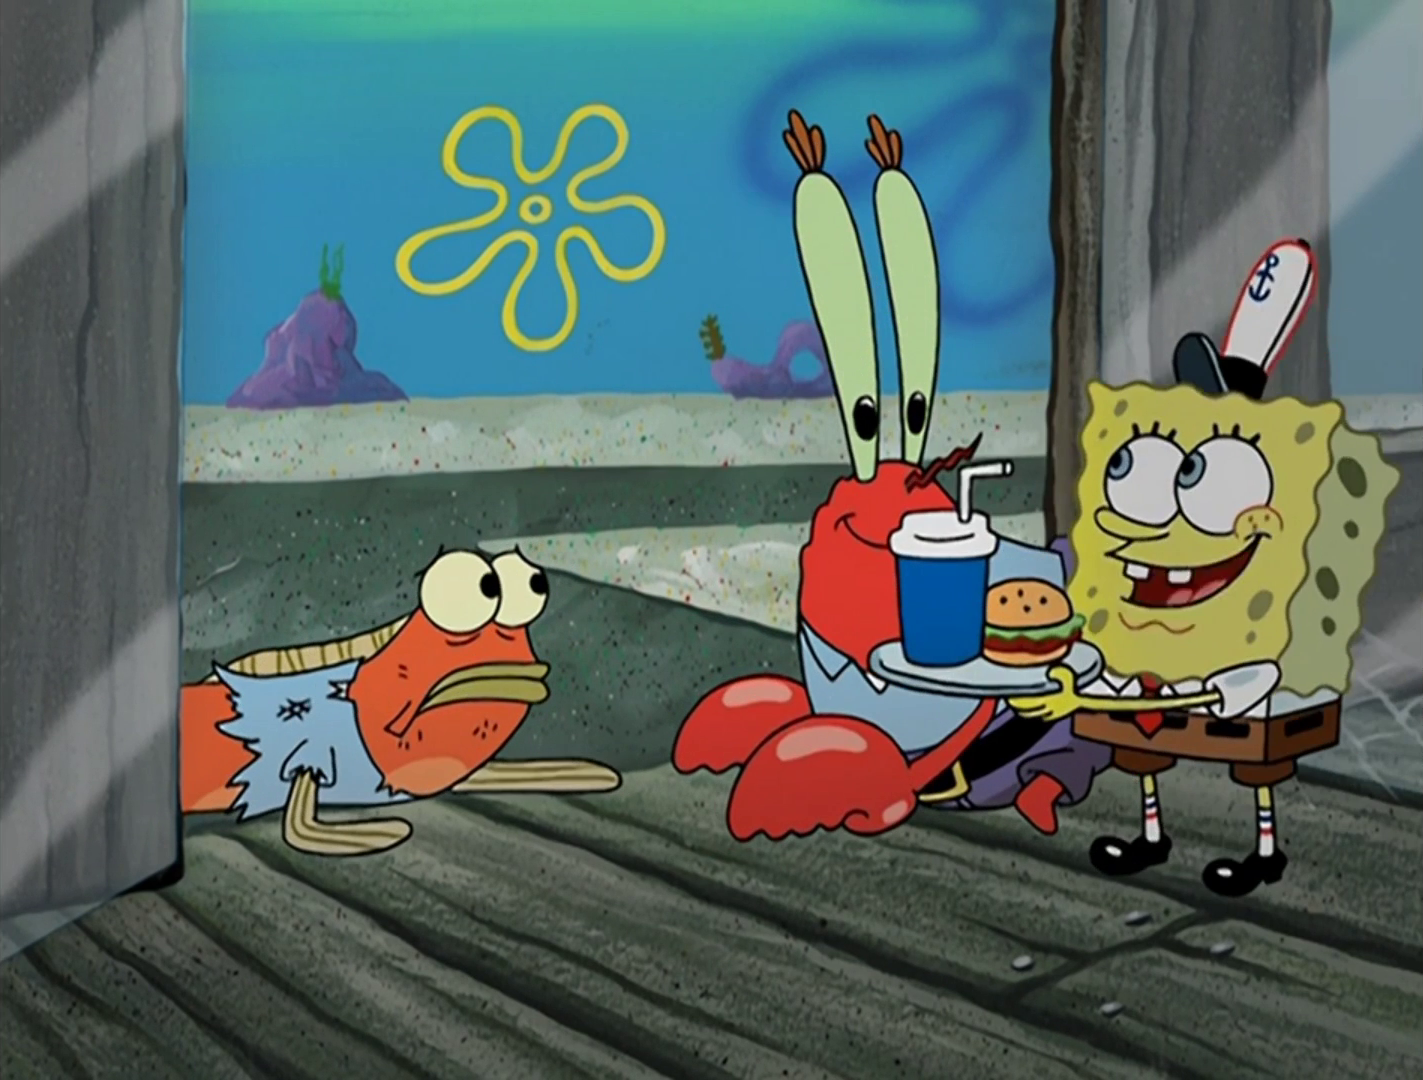 https://static.wikia.nocookie.net/spongebob/images/8/83/Patty_Hype_014.png/revision/latest?cb=20191126033759